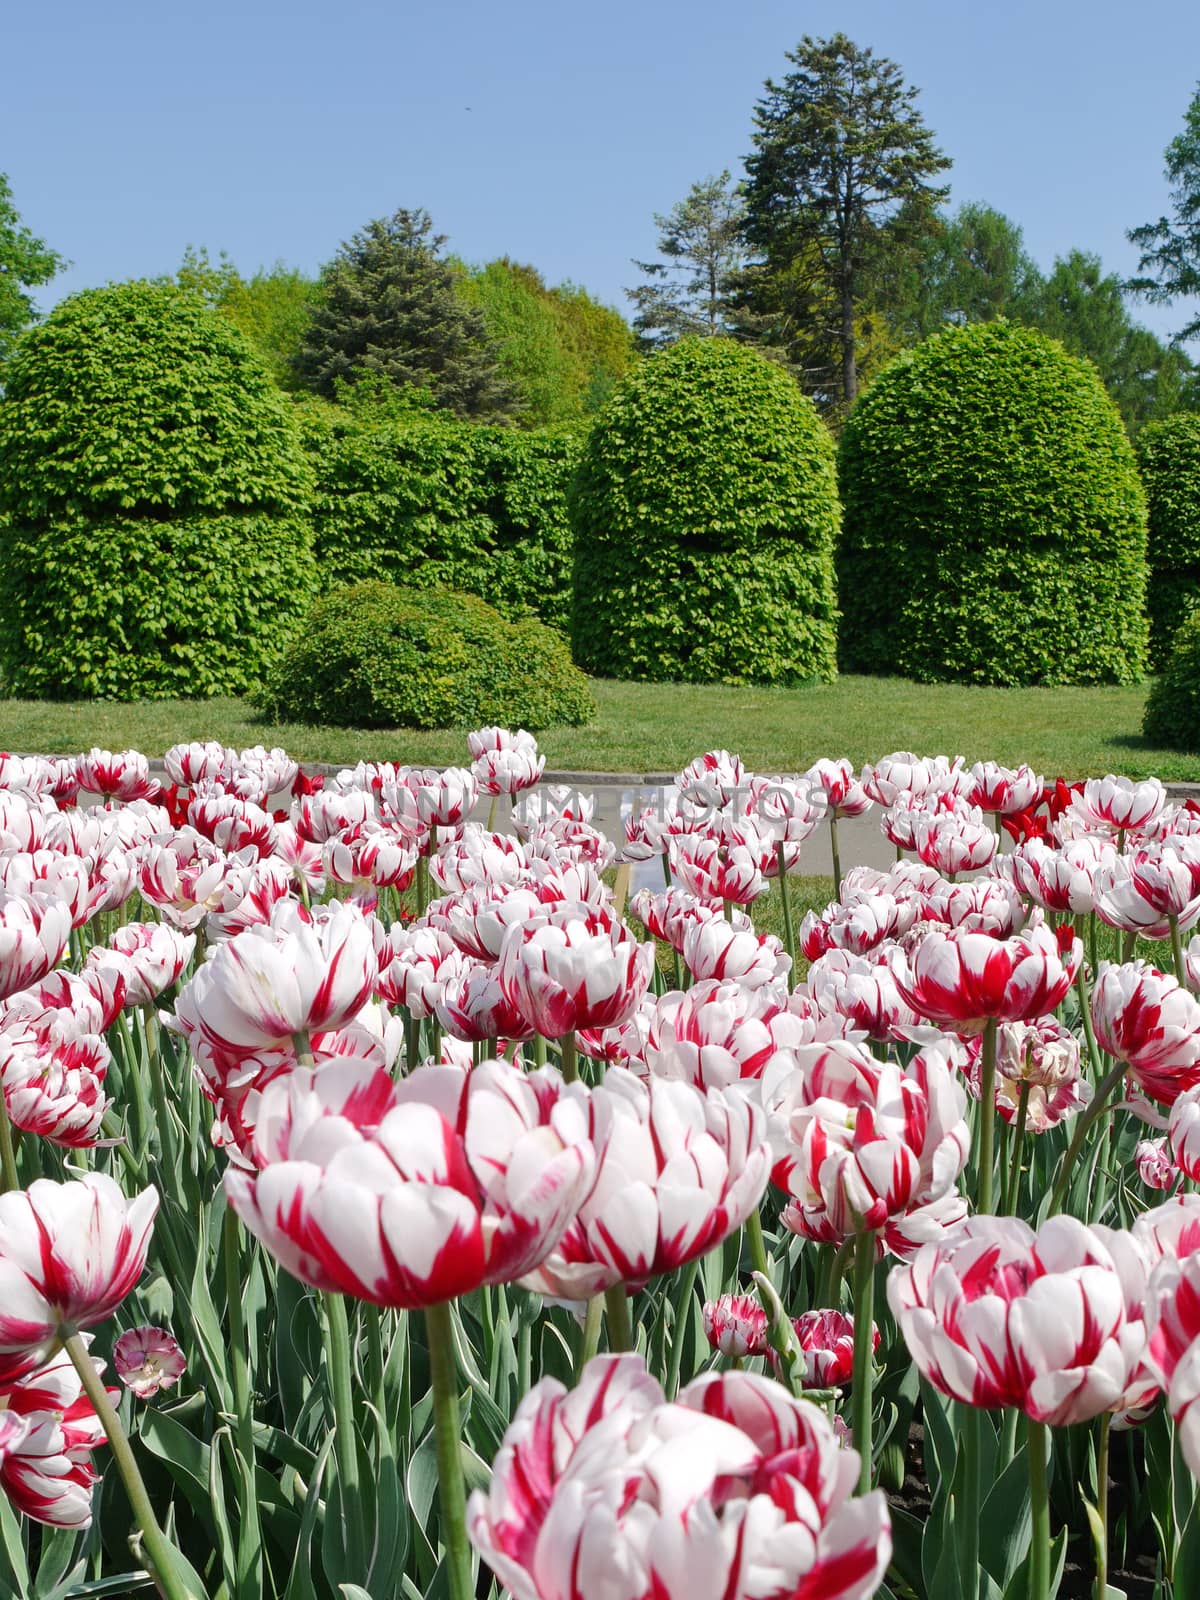 Field of white-red tulips. An unforgettable sight